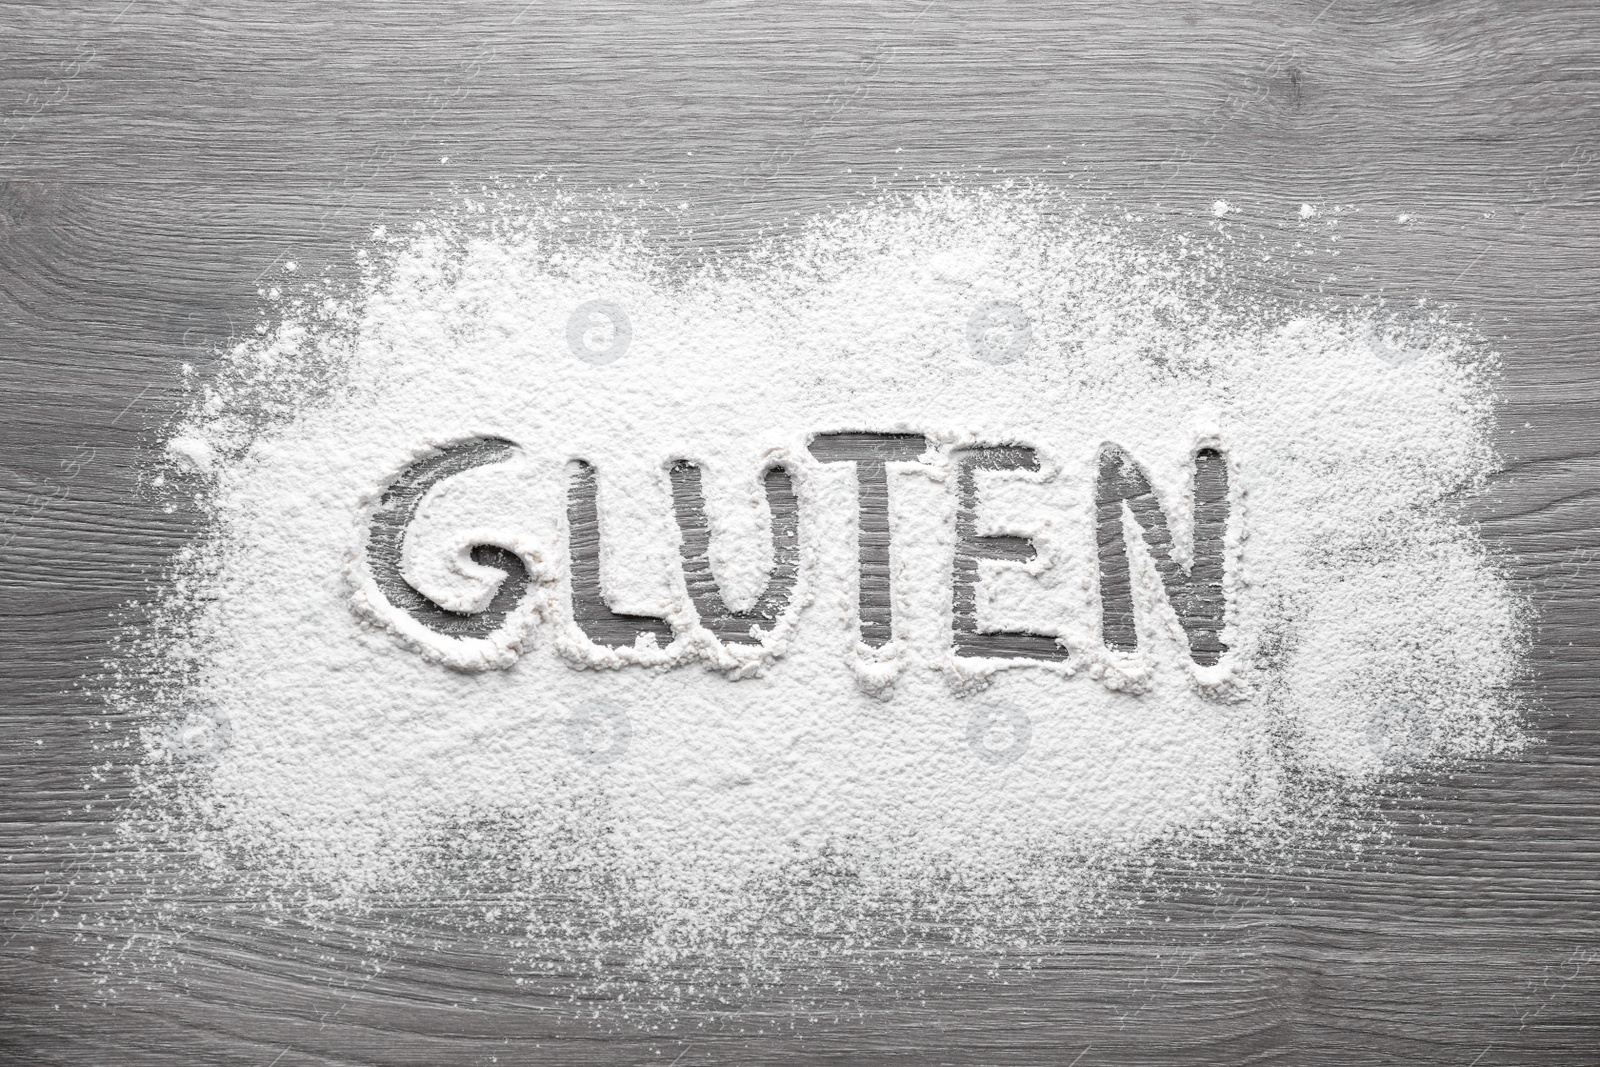 Photo of Word Gluten written with flour on wooden table, top view